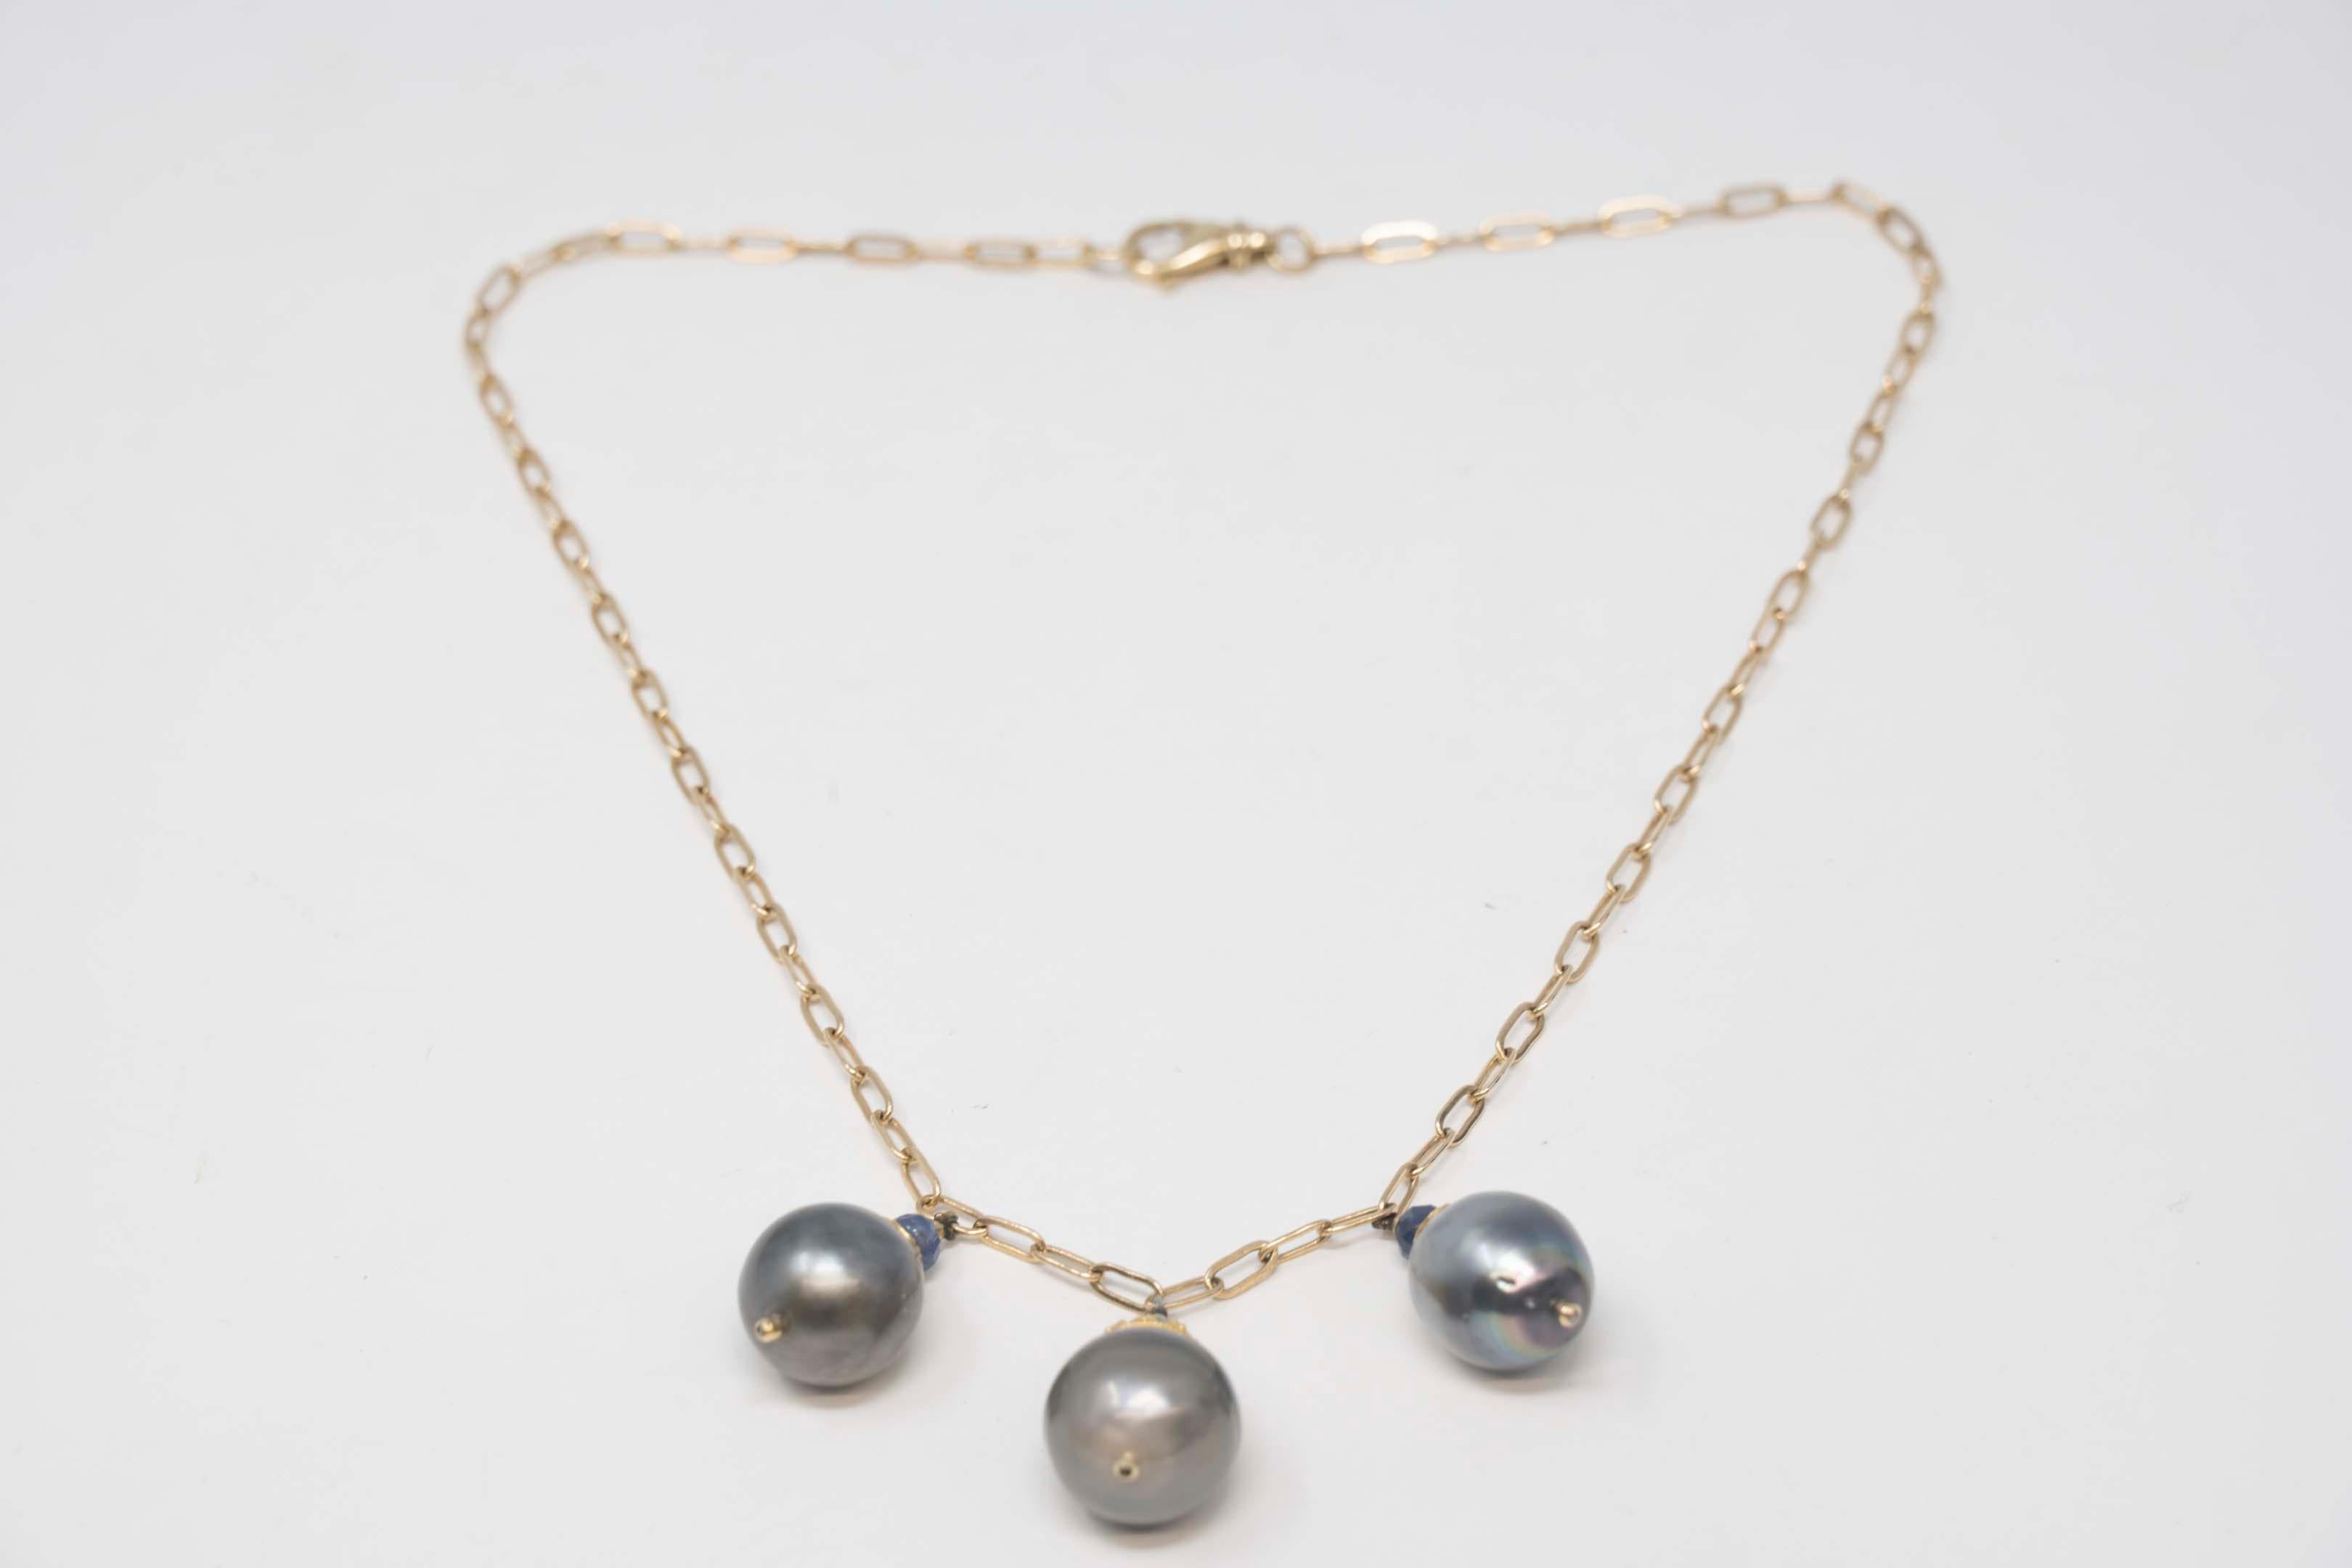 Uncut Three Baroque Cultured Tahiti Pearls & 14k Gold Necklace For Sale